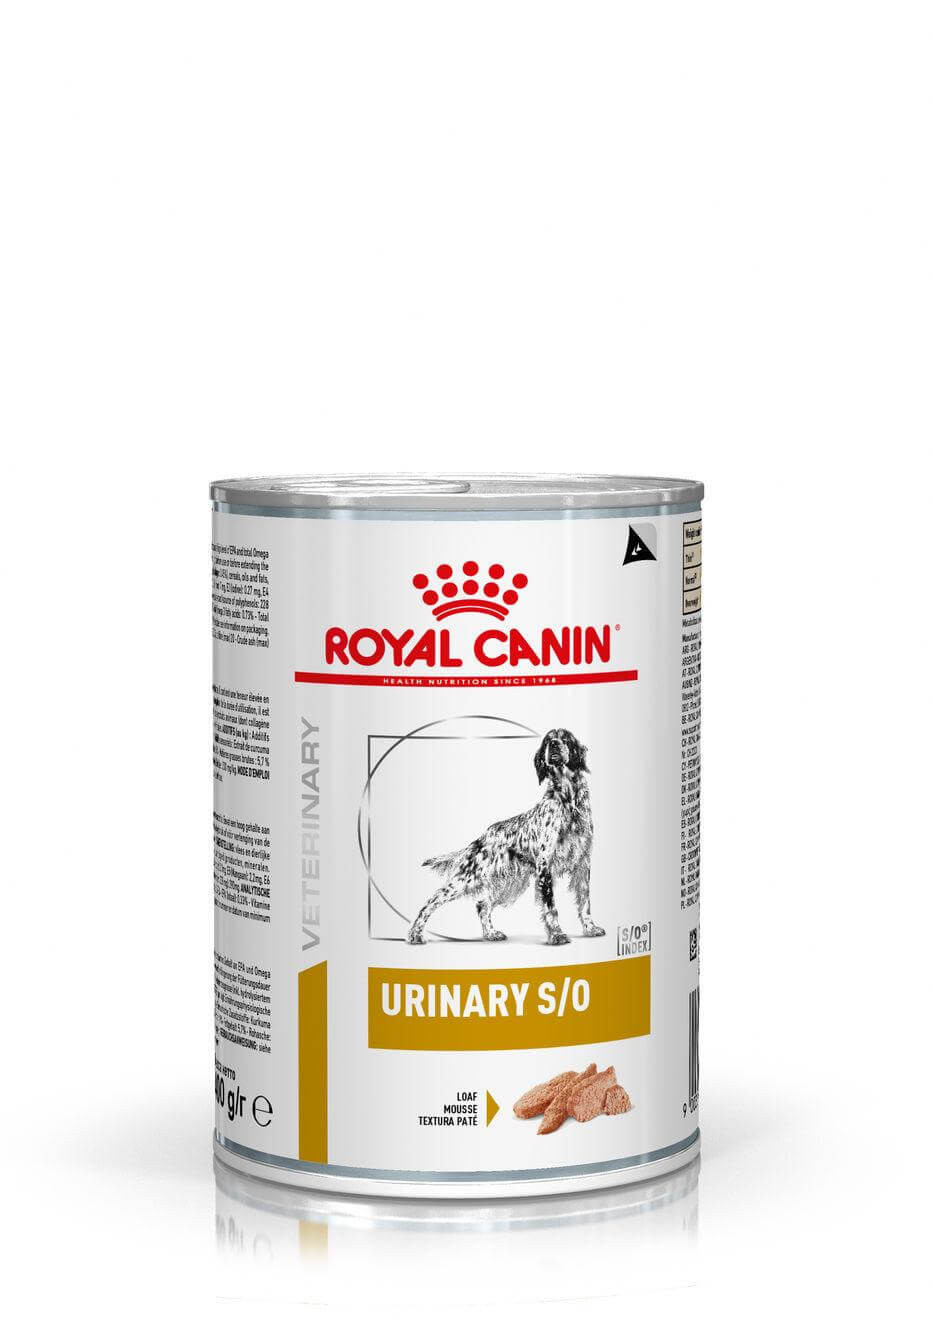 Royal Canin Veterinary Urinary S/O Loaf pâtée pour chien